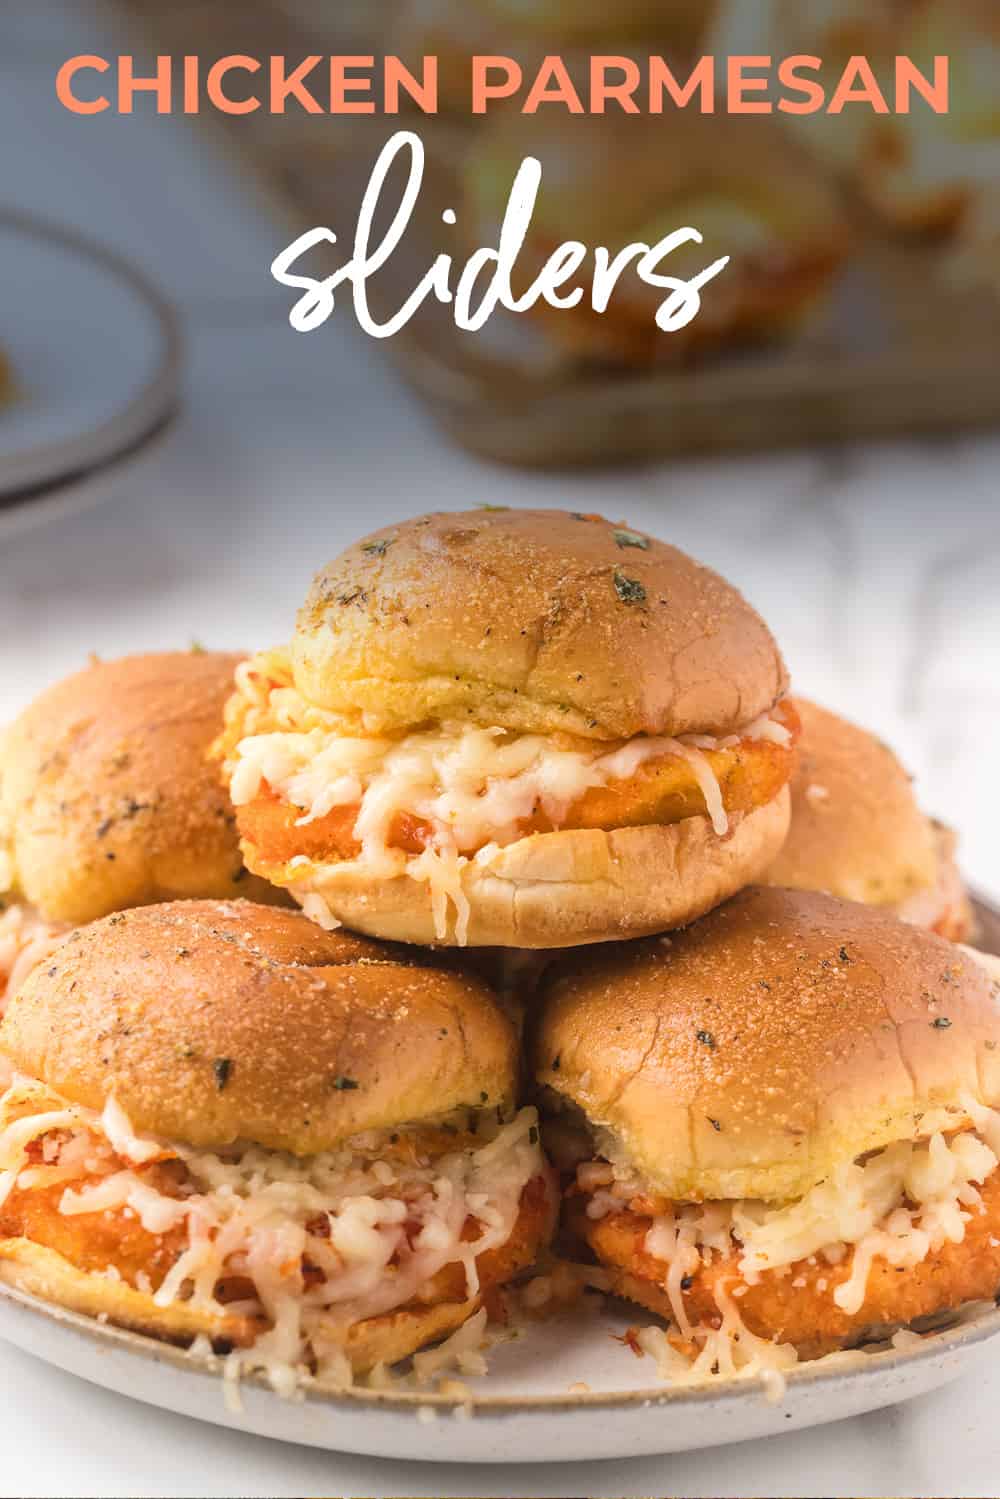 Chicken parmesan sliders stacked on a plate.